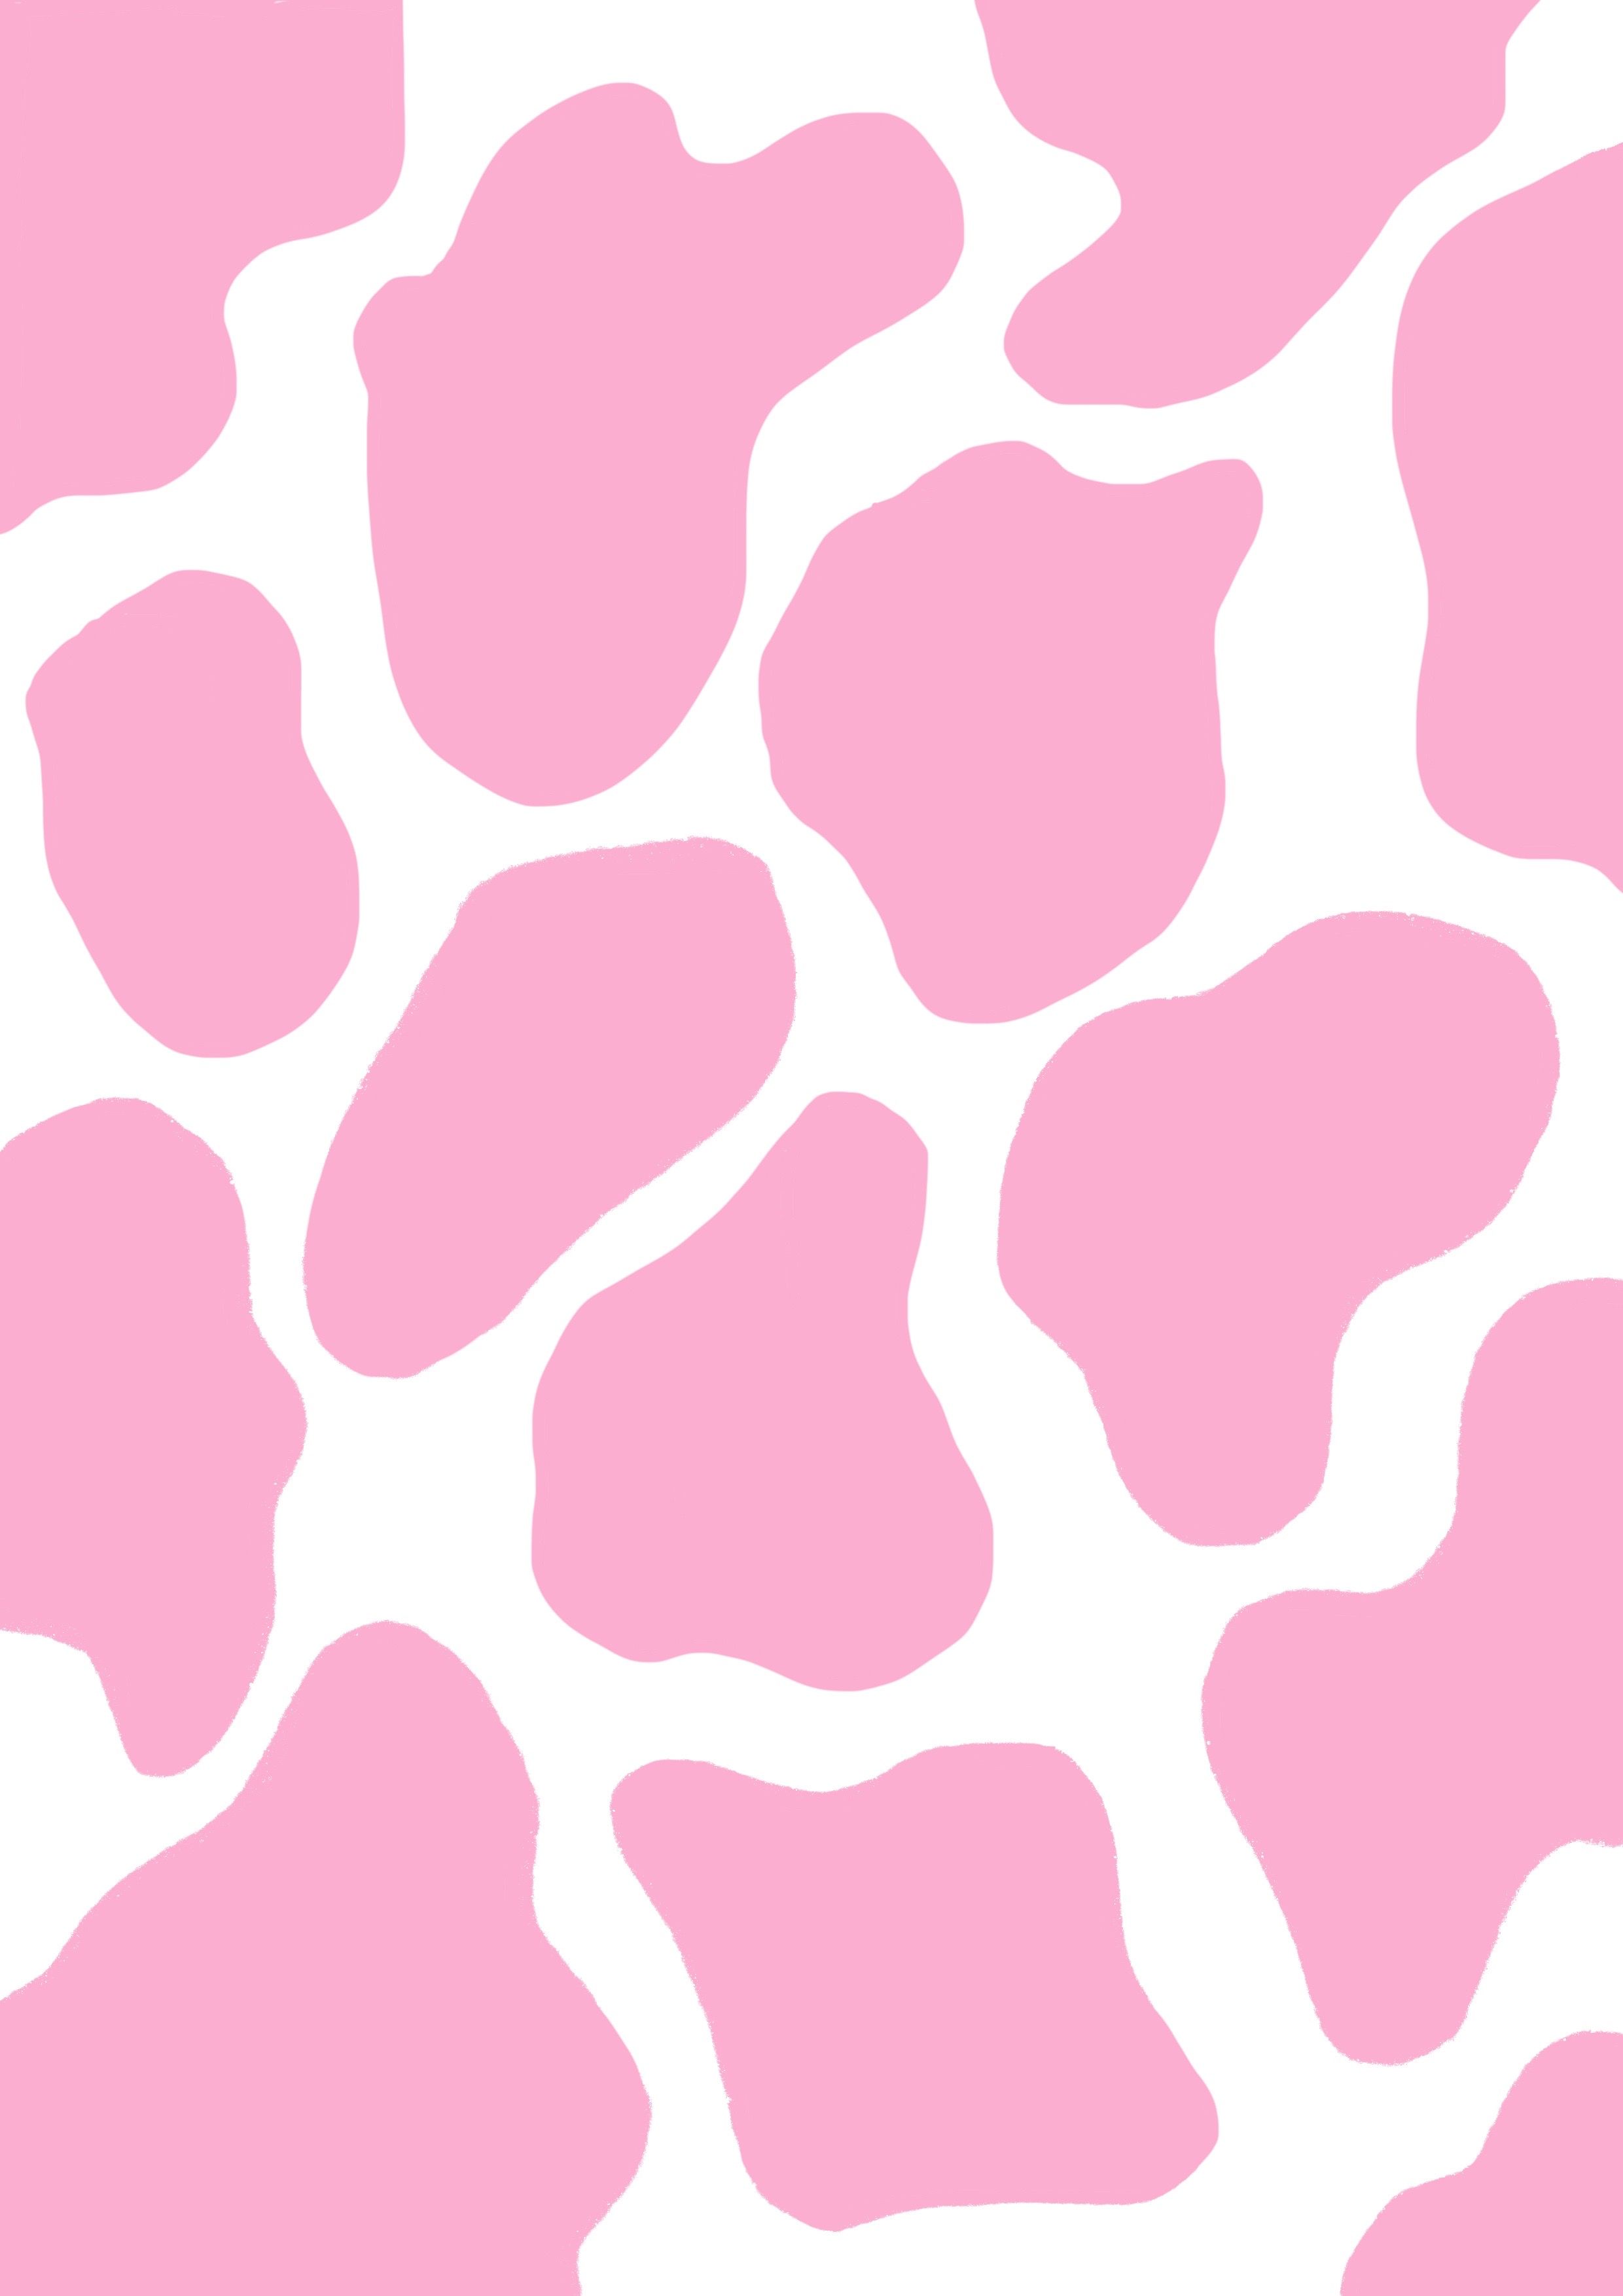 A pink and white pattern of spots - Cow